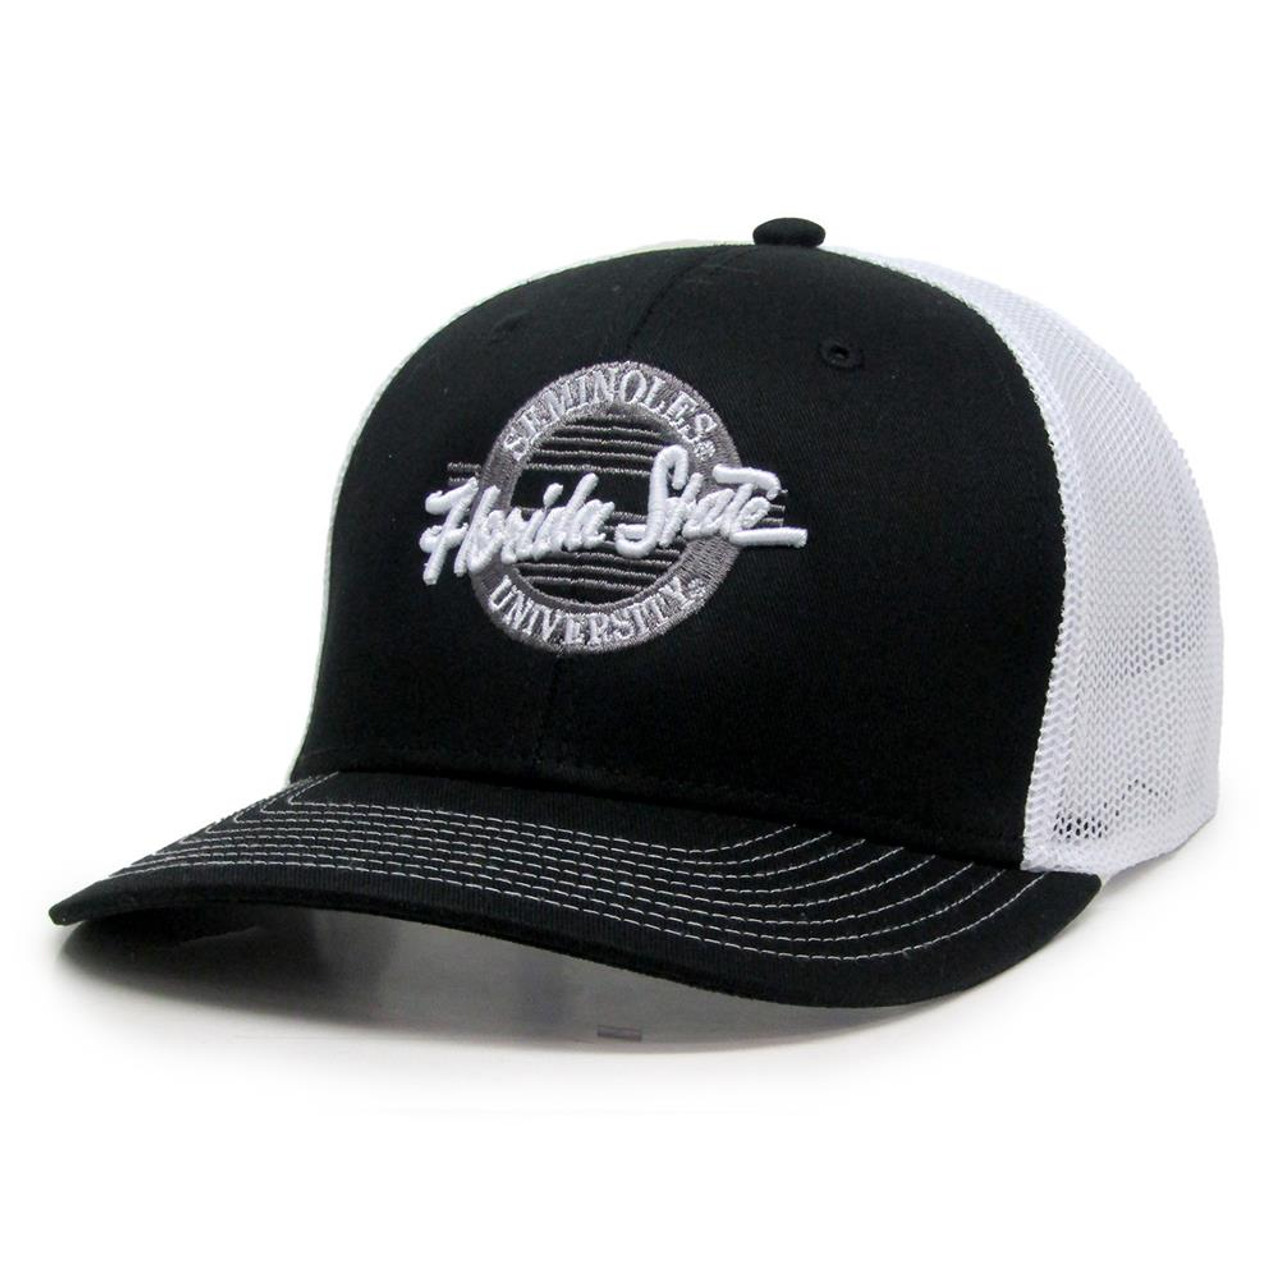 Los Angeles Kings Adidas Two-Tone Gray Black Structured Snapback Hat Cap